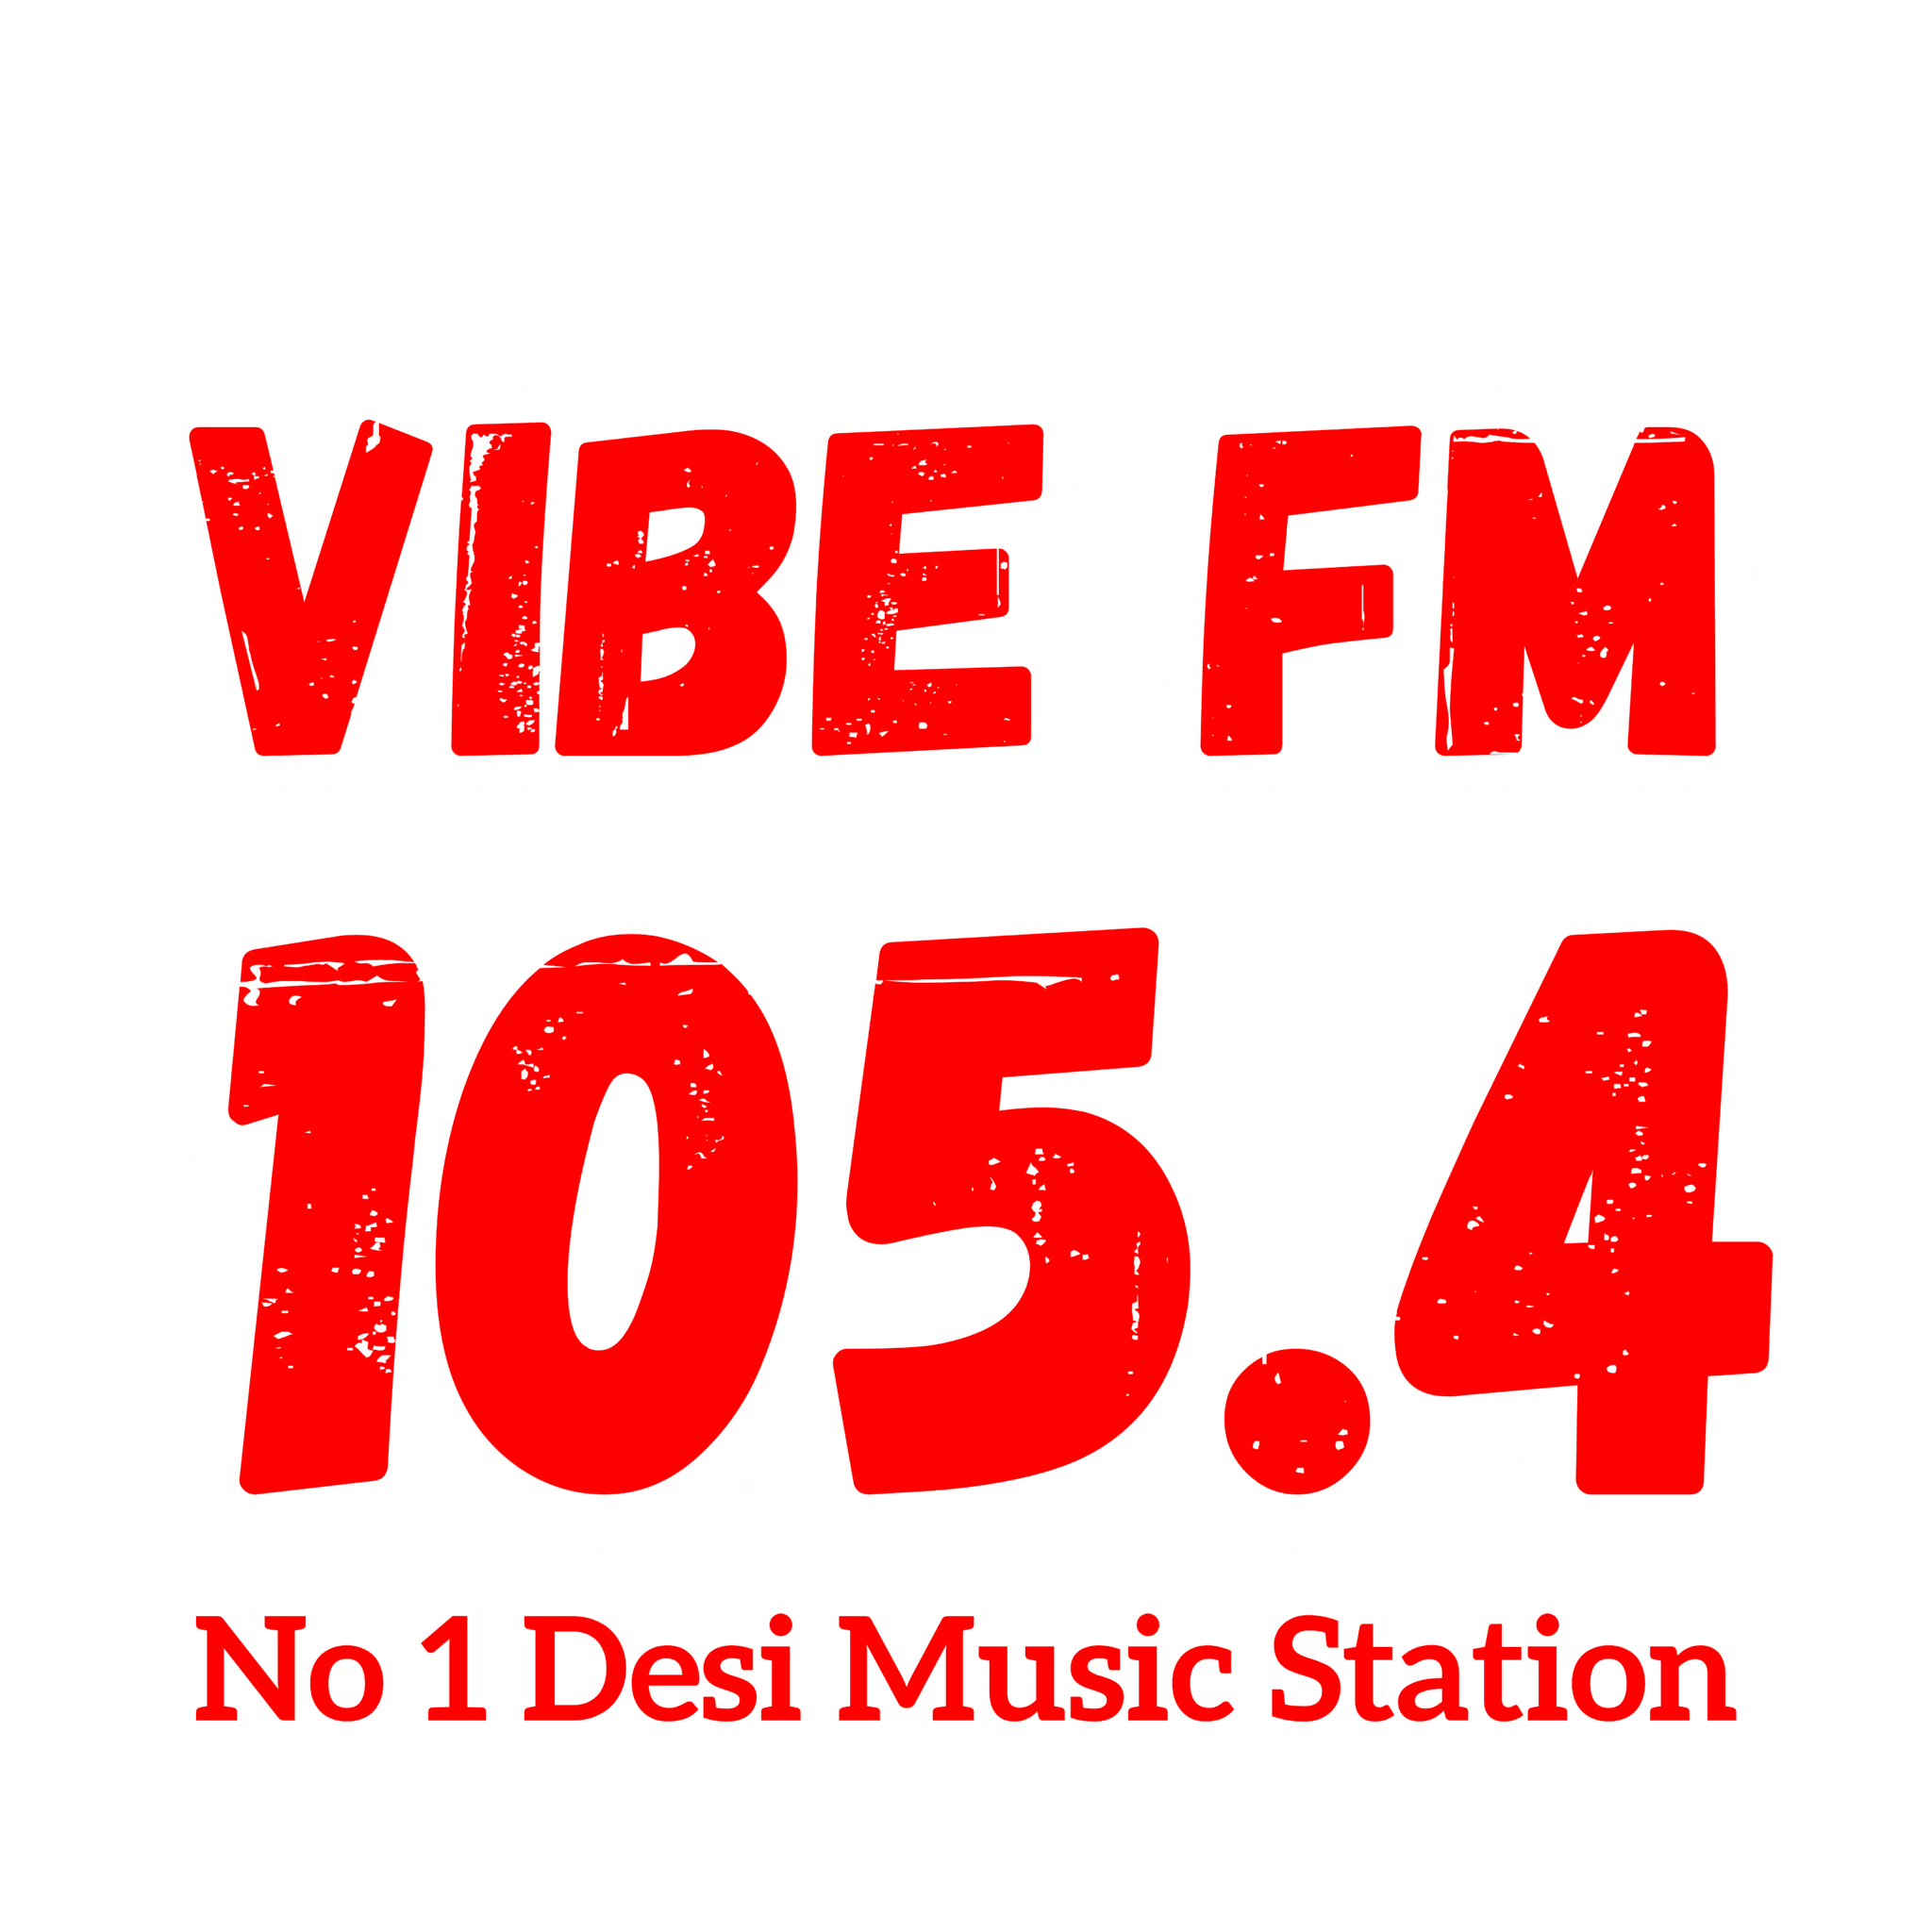 VIBE LOGO RED with no 1